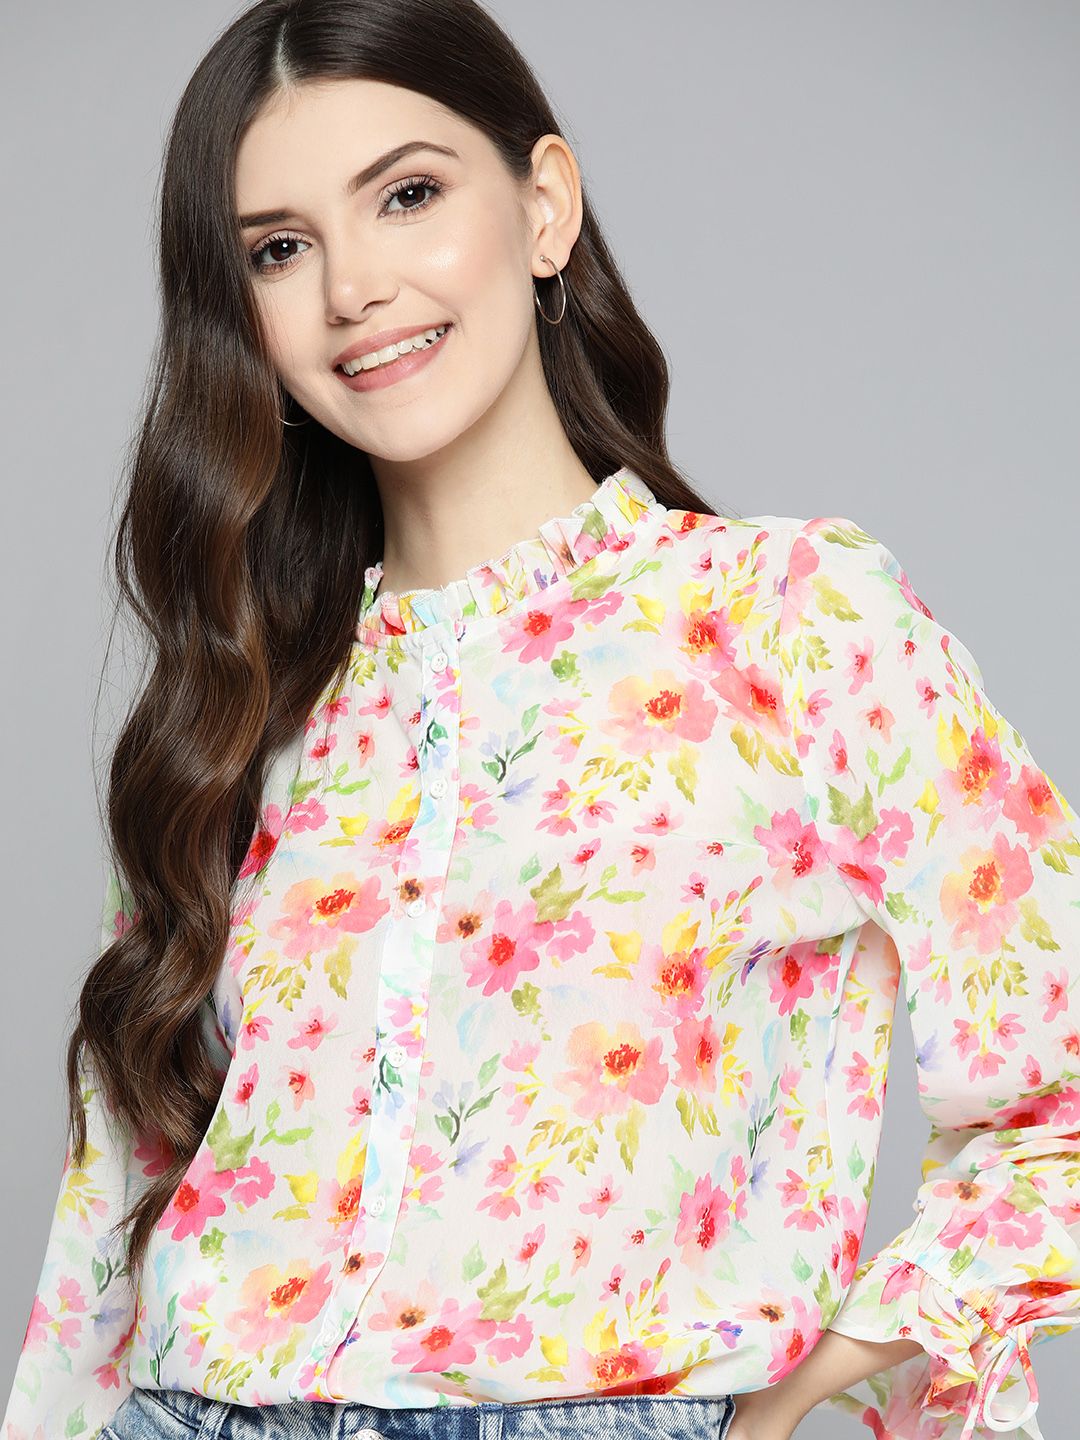 Mast & Harbour White & Pink Floral Print Mandarin Collar Shirt Style Top Price in India